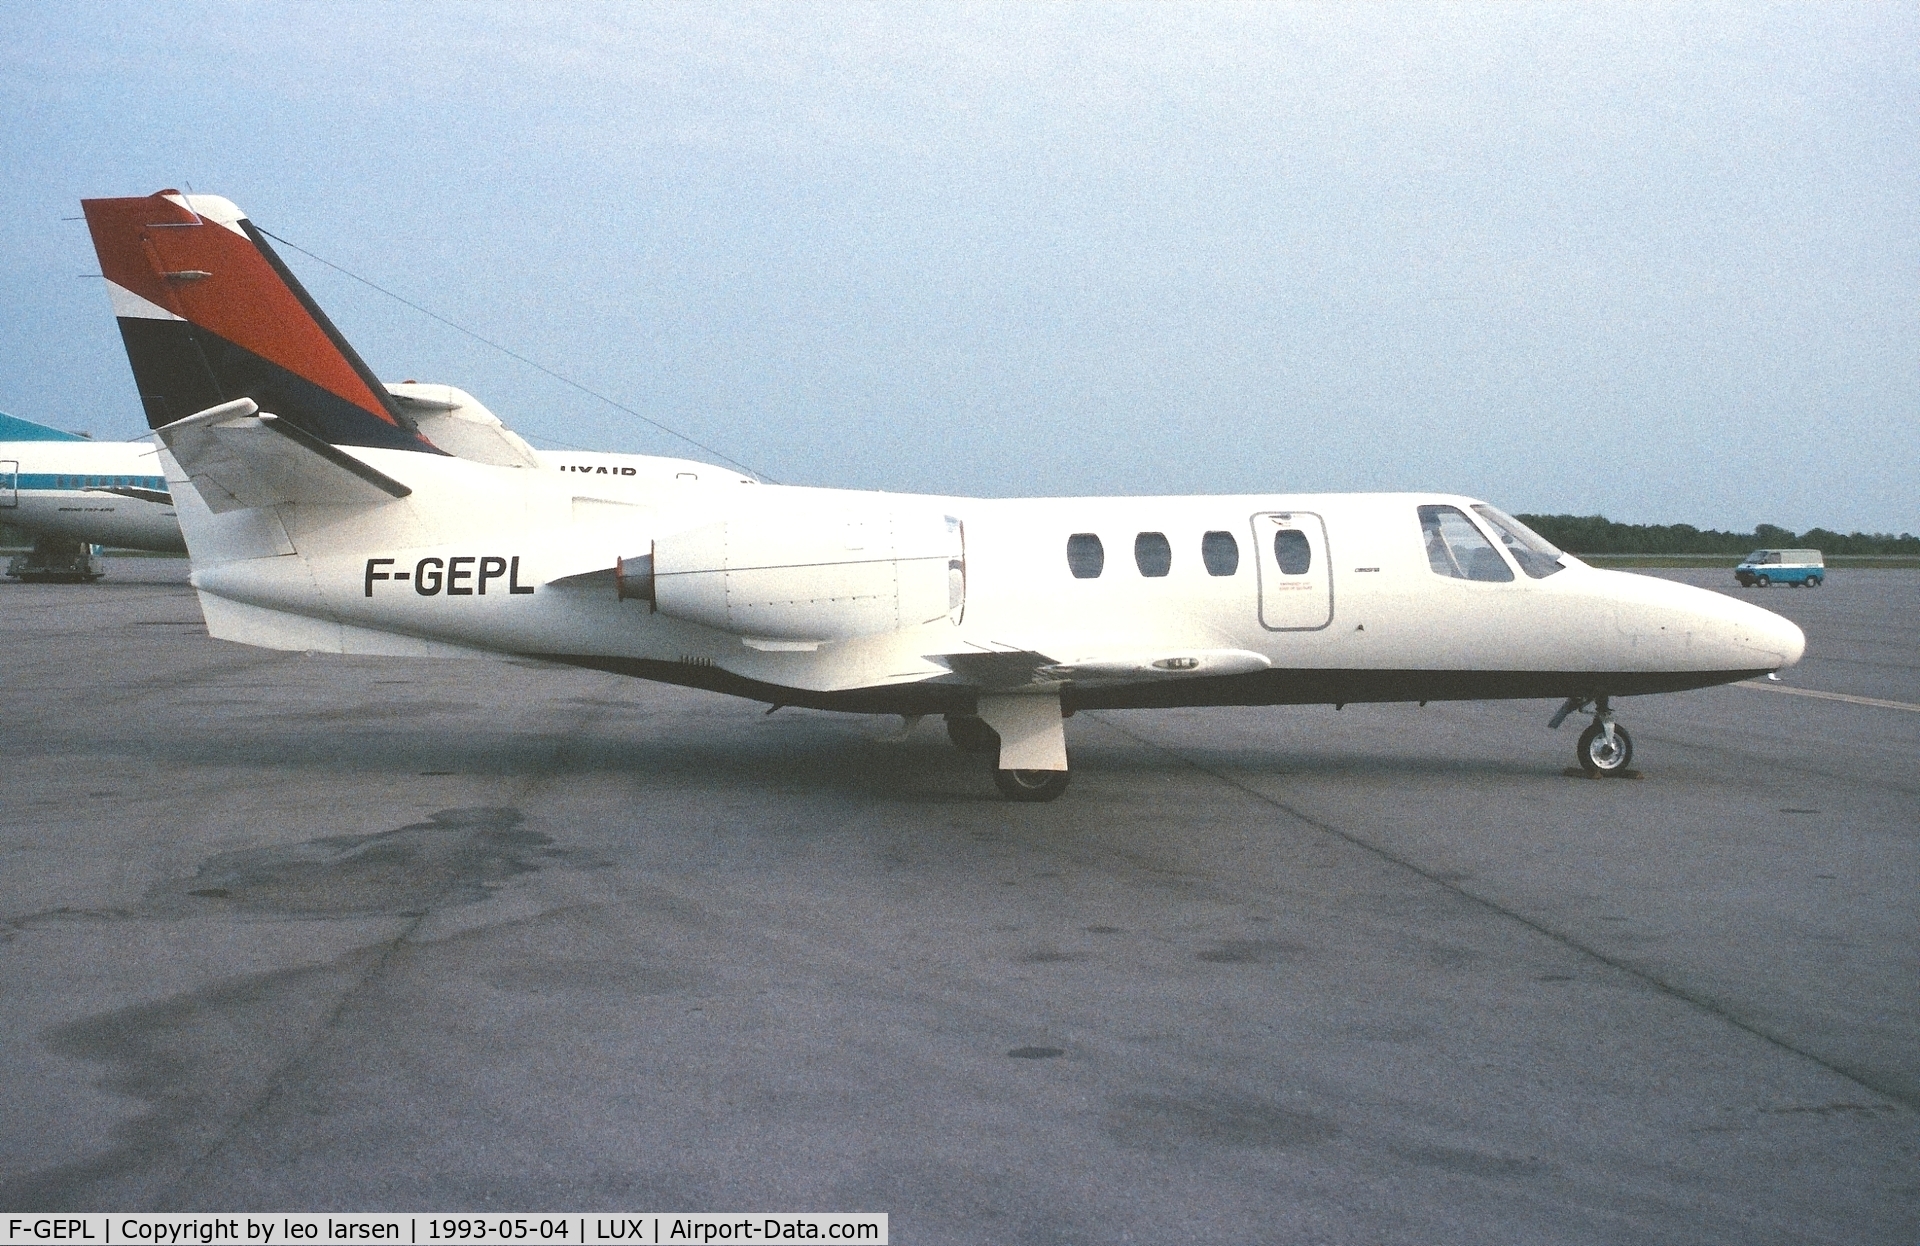 F-GEPL, 1976 Cessna 500 Citation I C/N 500-0164, Luxembourg 4.5.1993